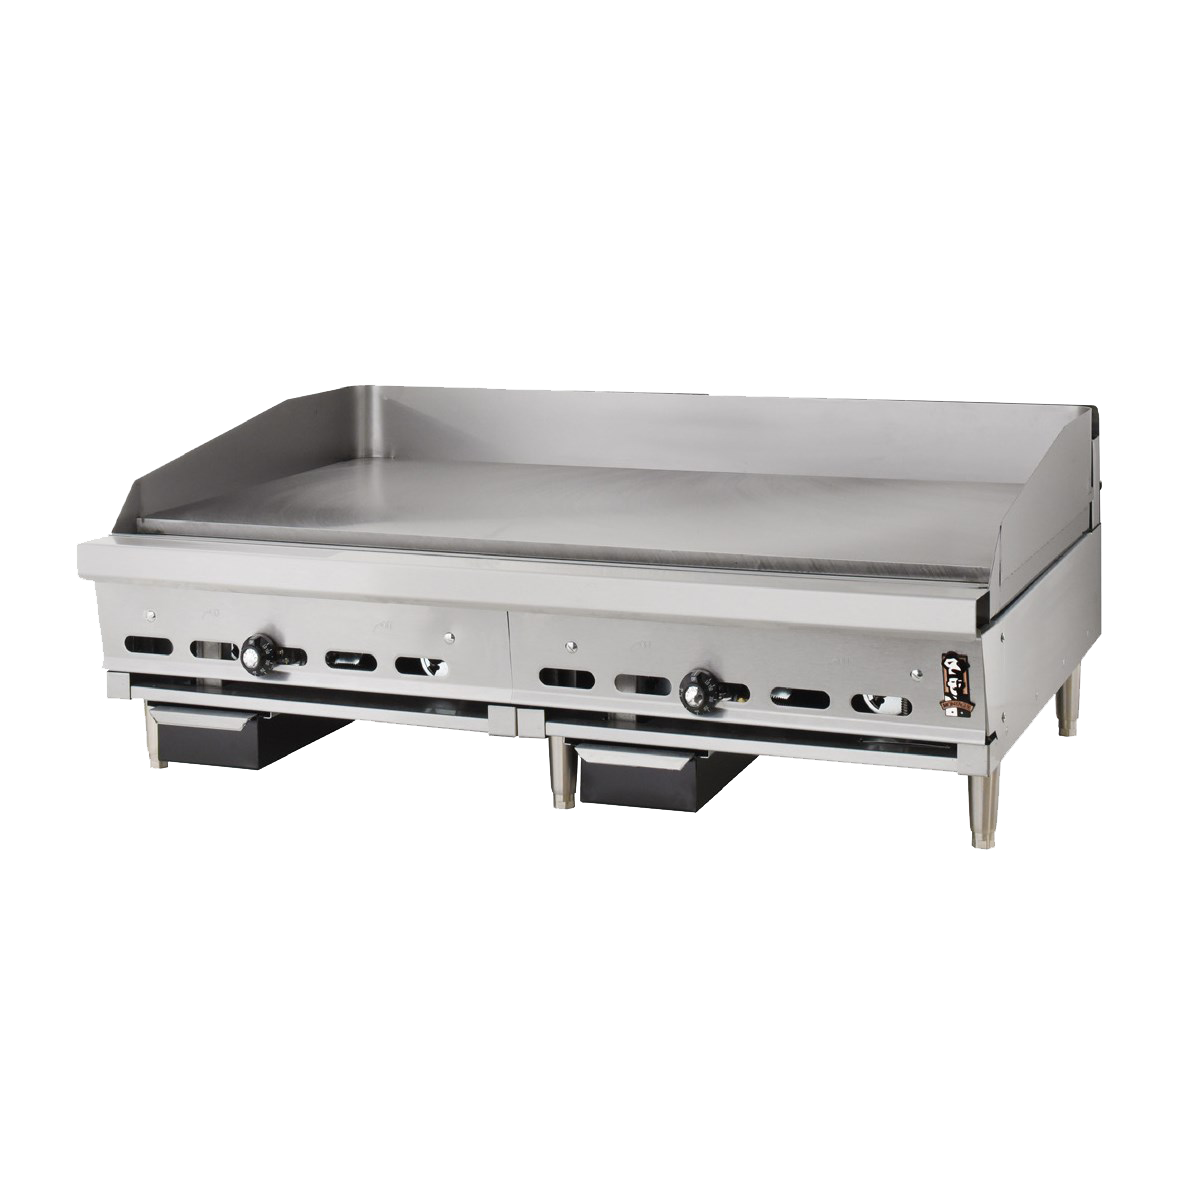 Montague Stainless Steel Heavy Duty 48" Wide Countertop Gas Range with Griddle and Thermostatic Controls